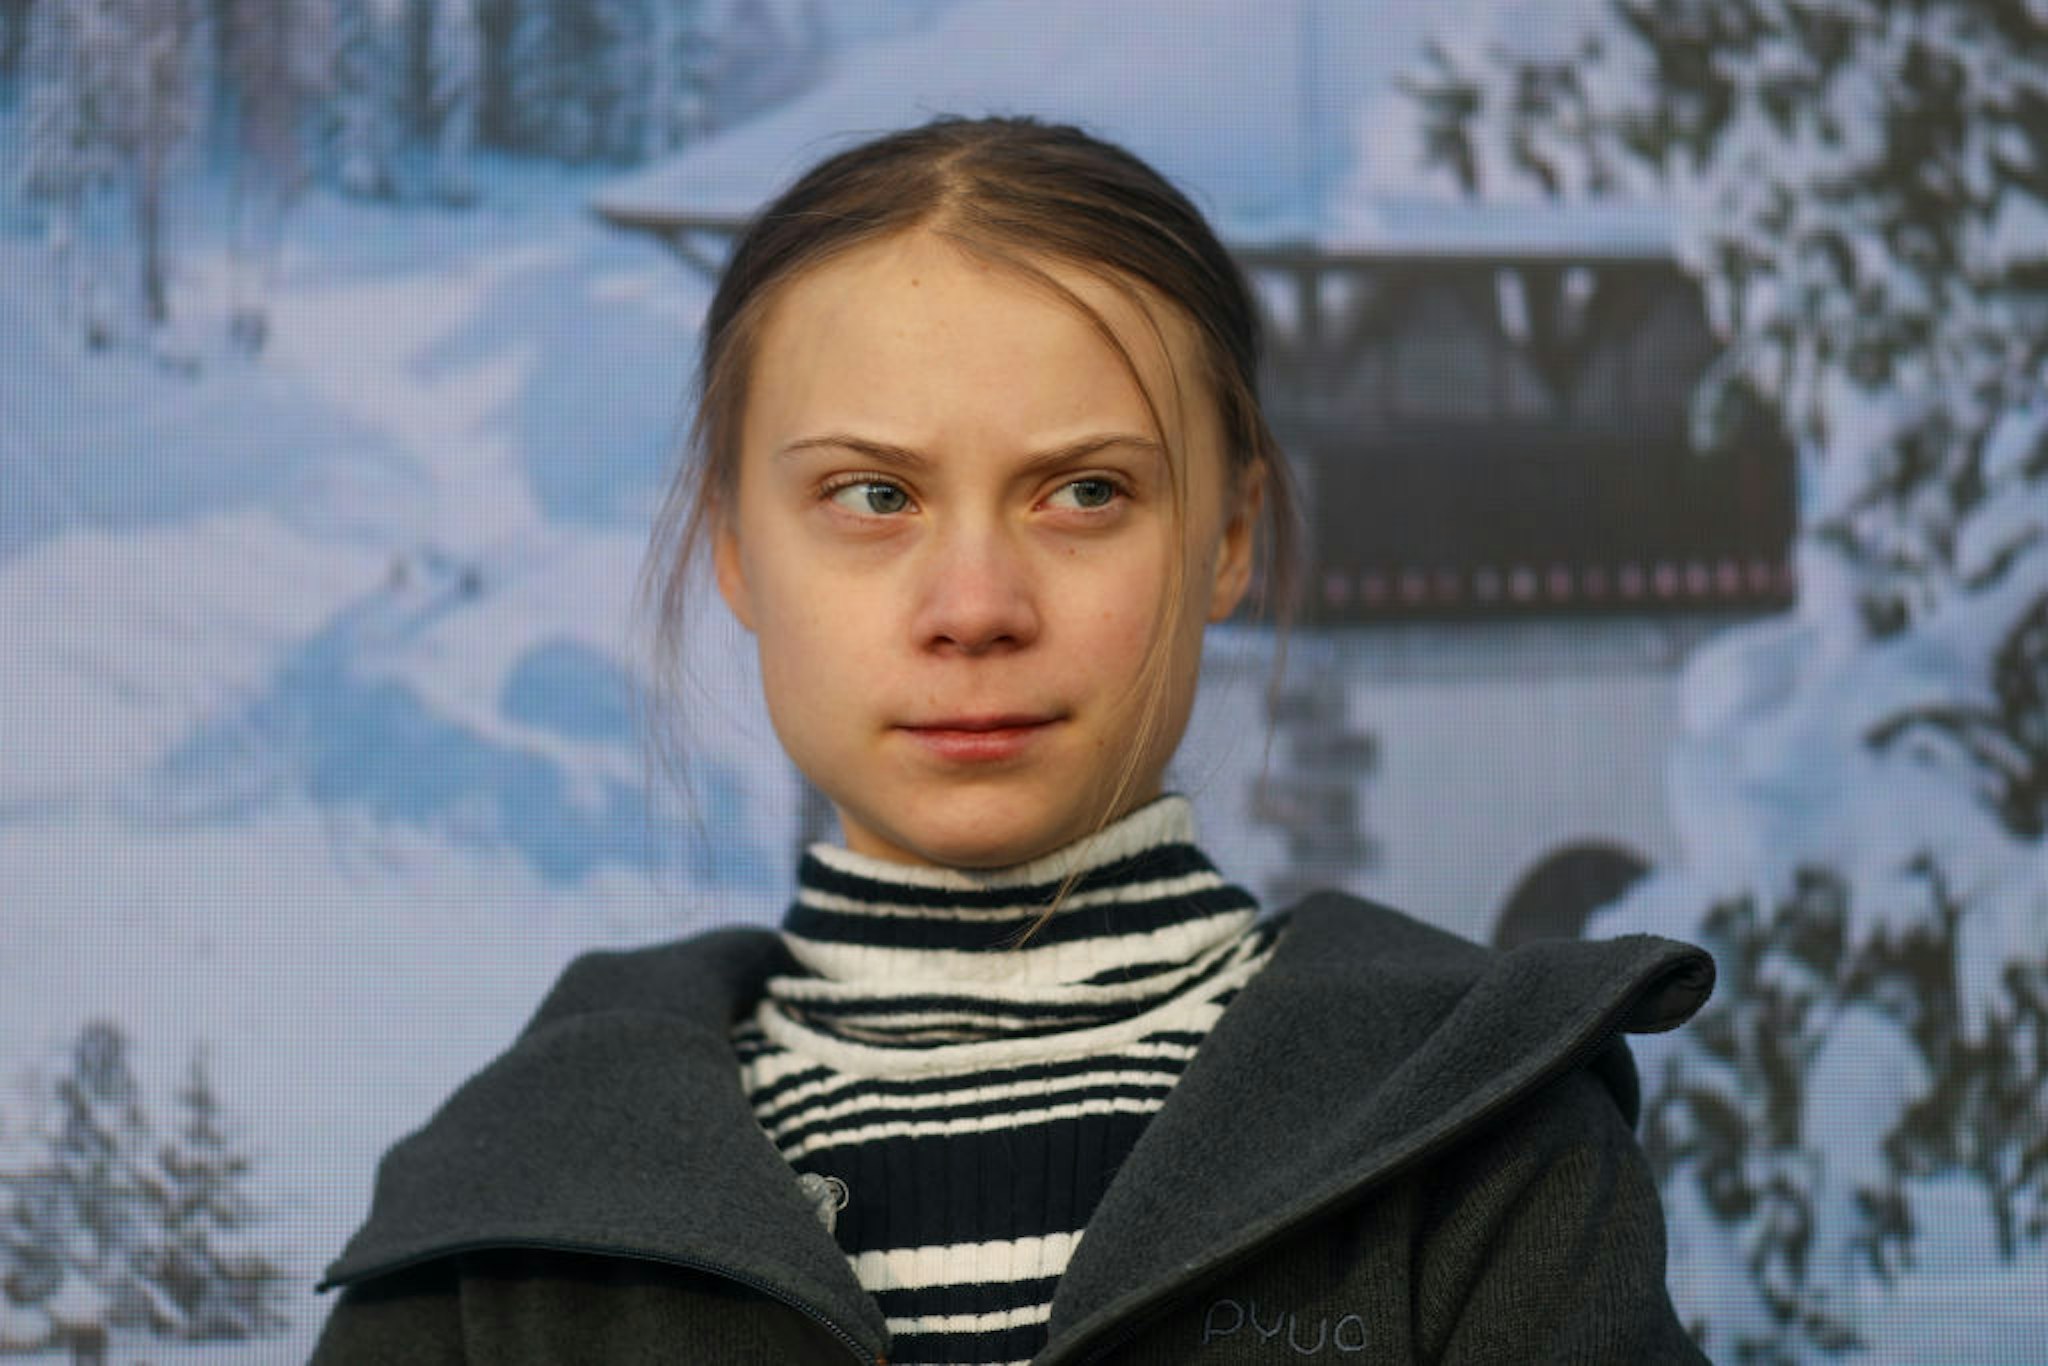 Greta Thunberg, climate activist, reacts during a news conference on the closing day of the World Economic Forum (WEF) in Davos, Switzerland, on Friday, Jan. 24, 2020.